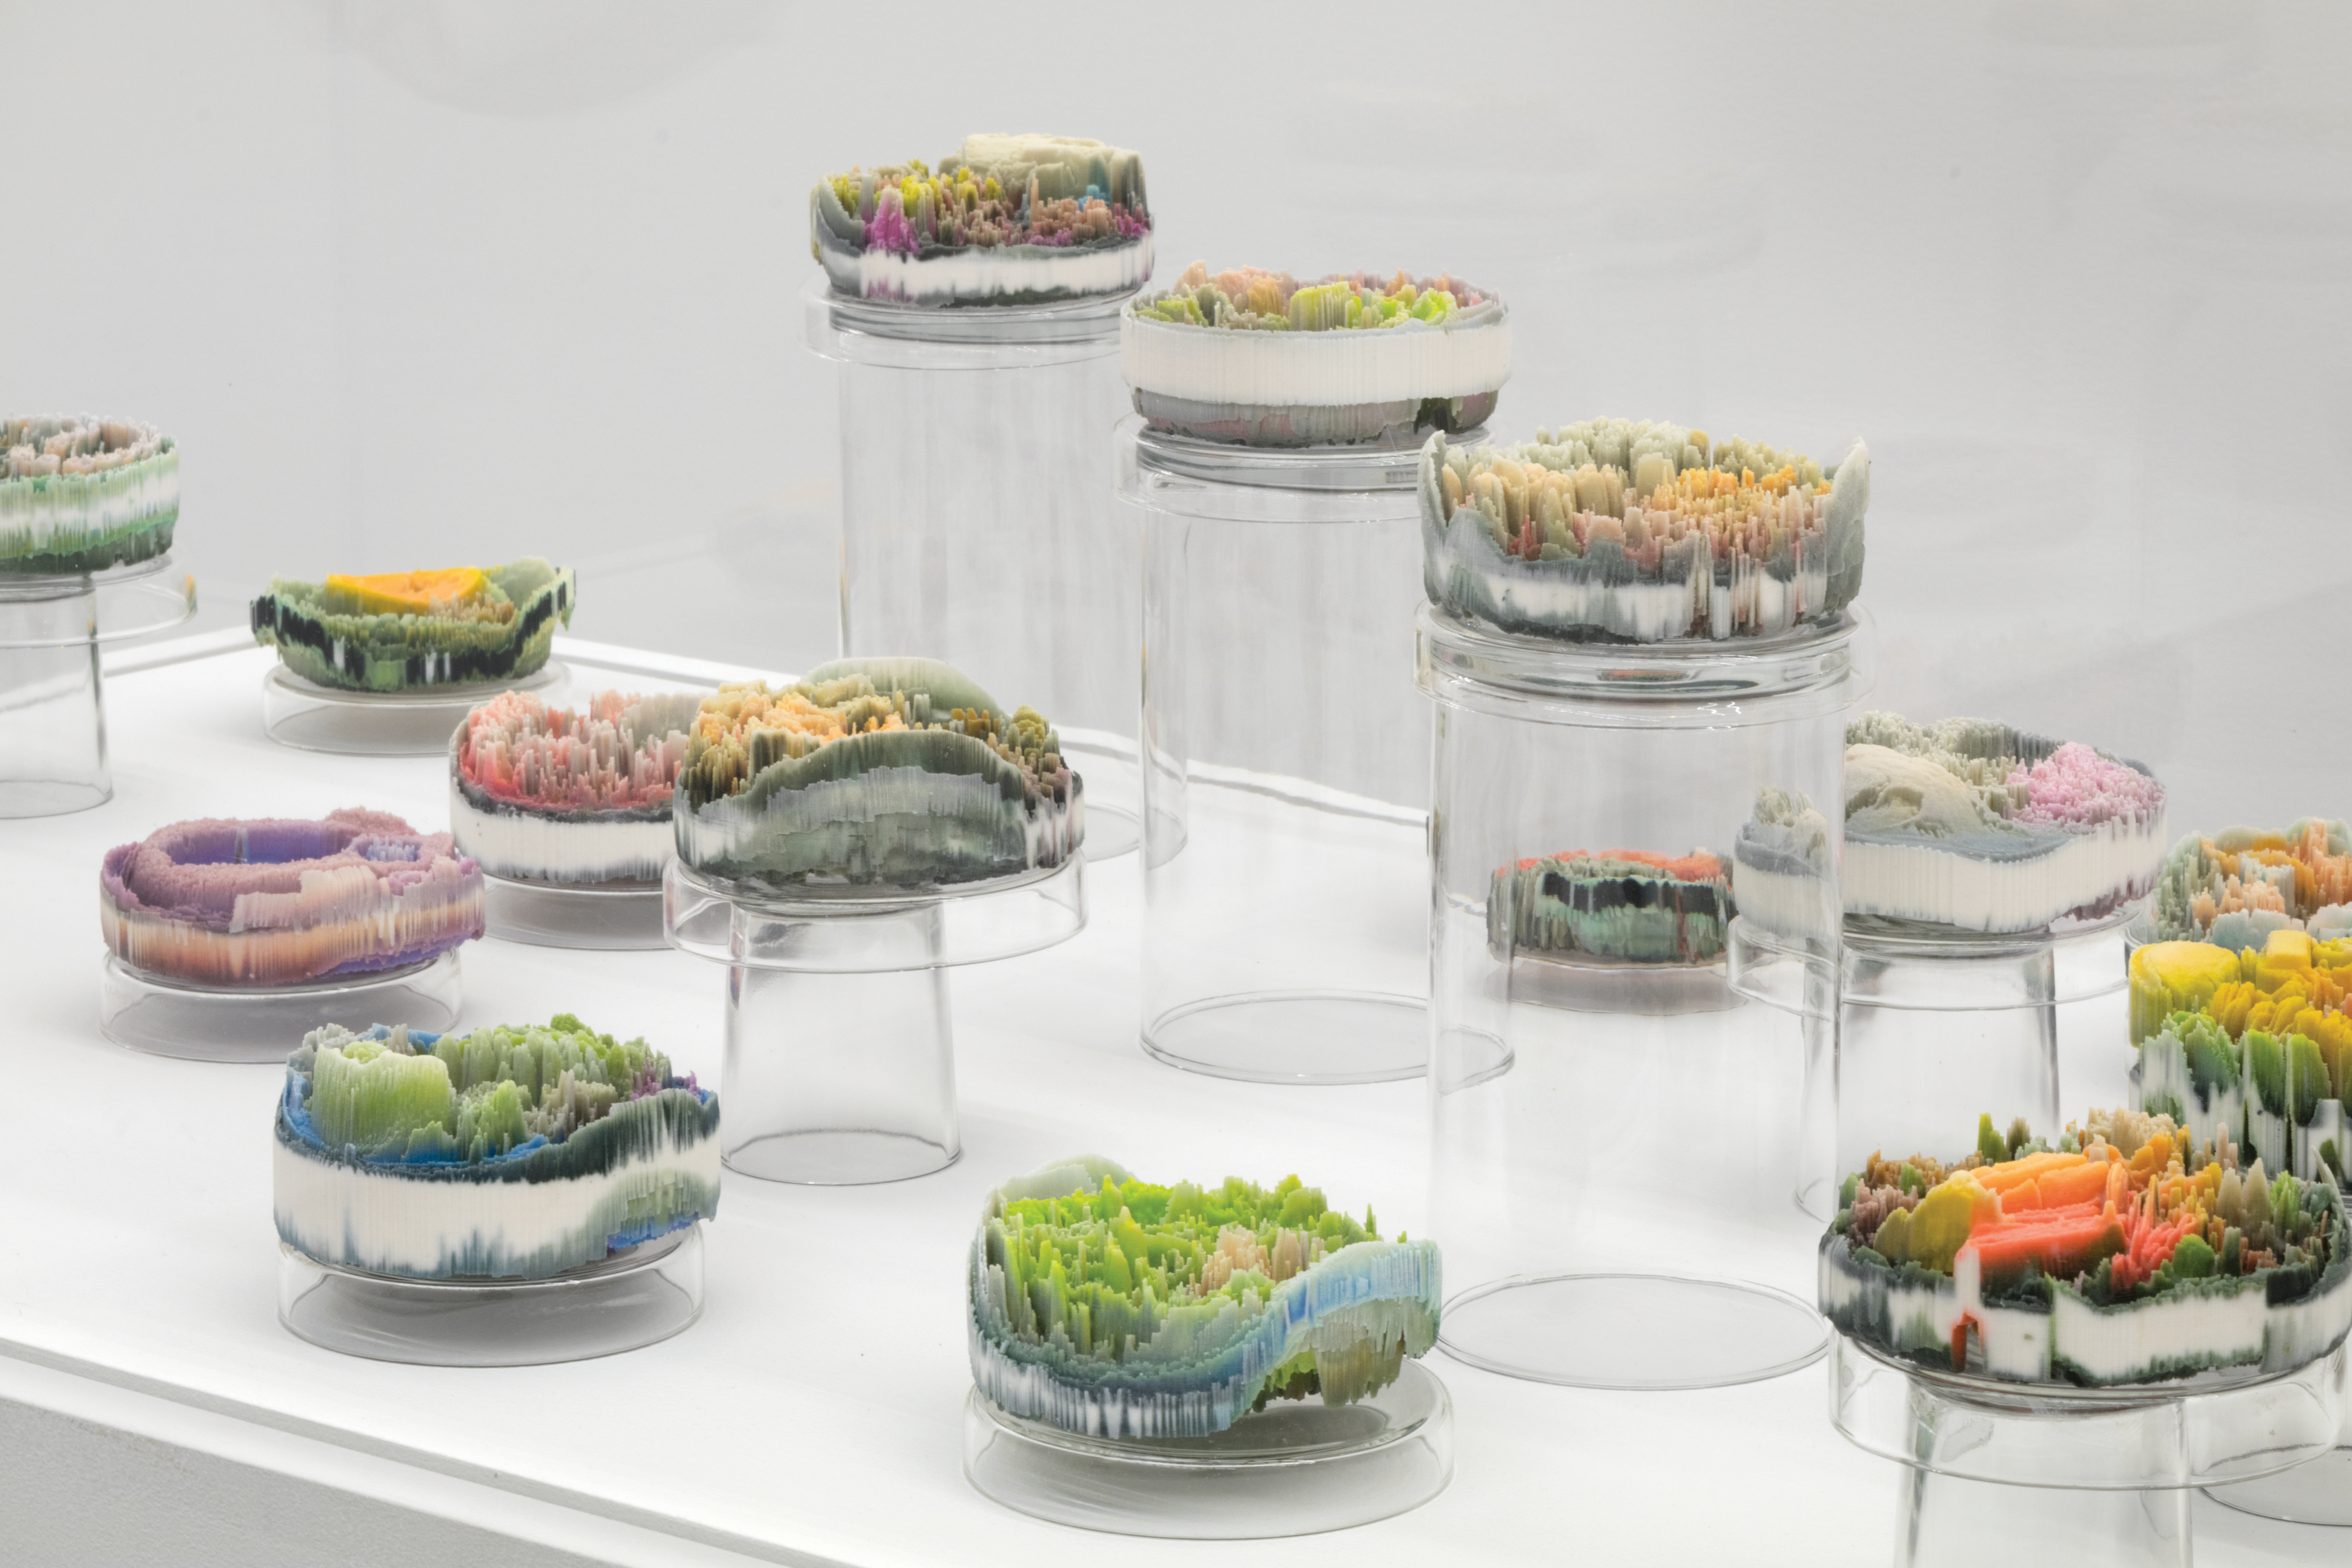 Suzanne Anker, Remote Sensing: Micro-Landscapes (detail), 2013–17, plaster, pigment, resin in 24 Petri dishes, each 4 x 4 x 2”. Courtesy of the artist.